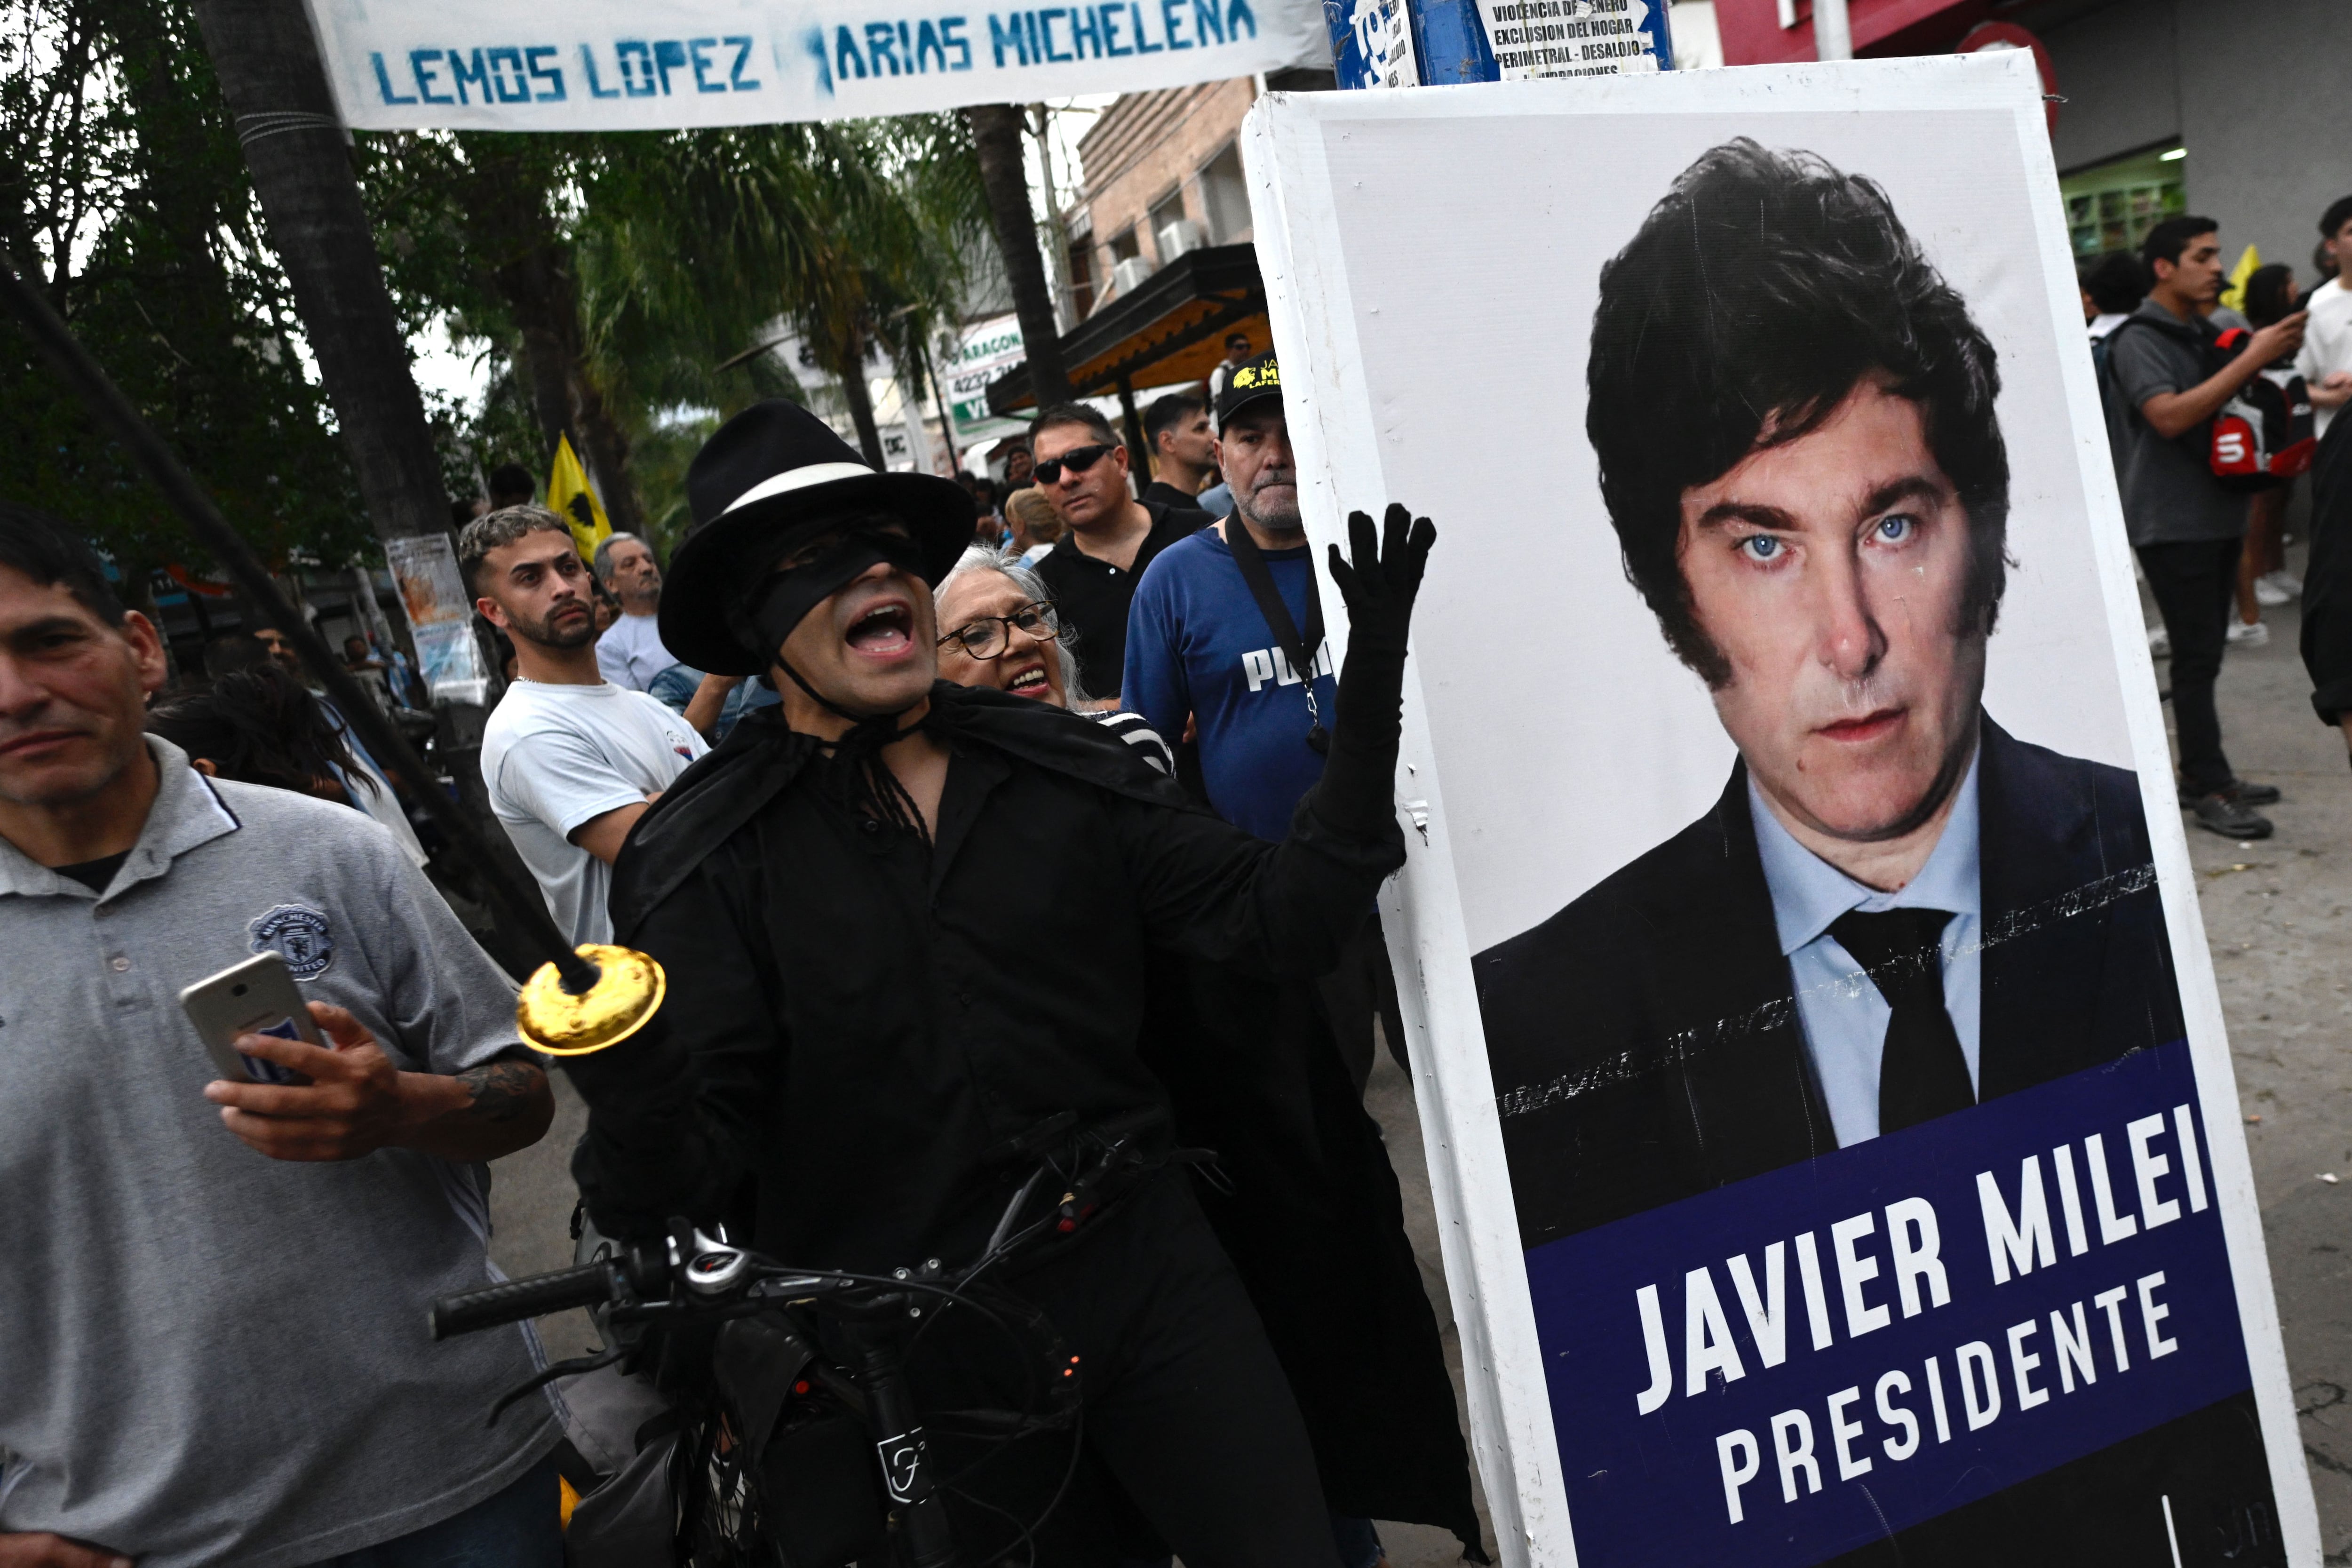 A supporter of Javier Milei dressed as the television character Zorro shouts slogans during a campaign rally in Ezeiza, Buenos Aires province, on November 15, 2023. (Photo by Luis ROBAYO/AFP).